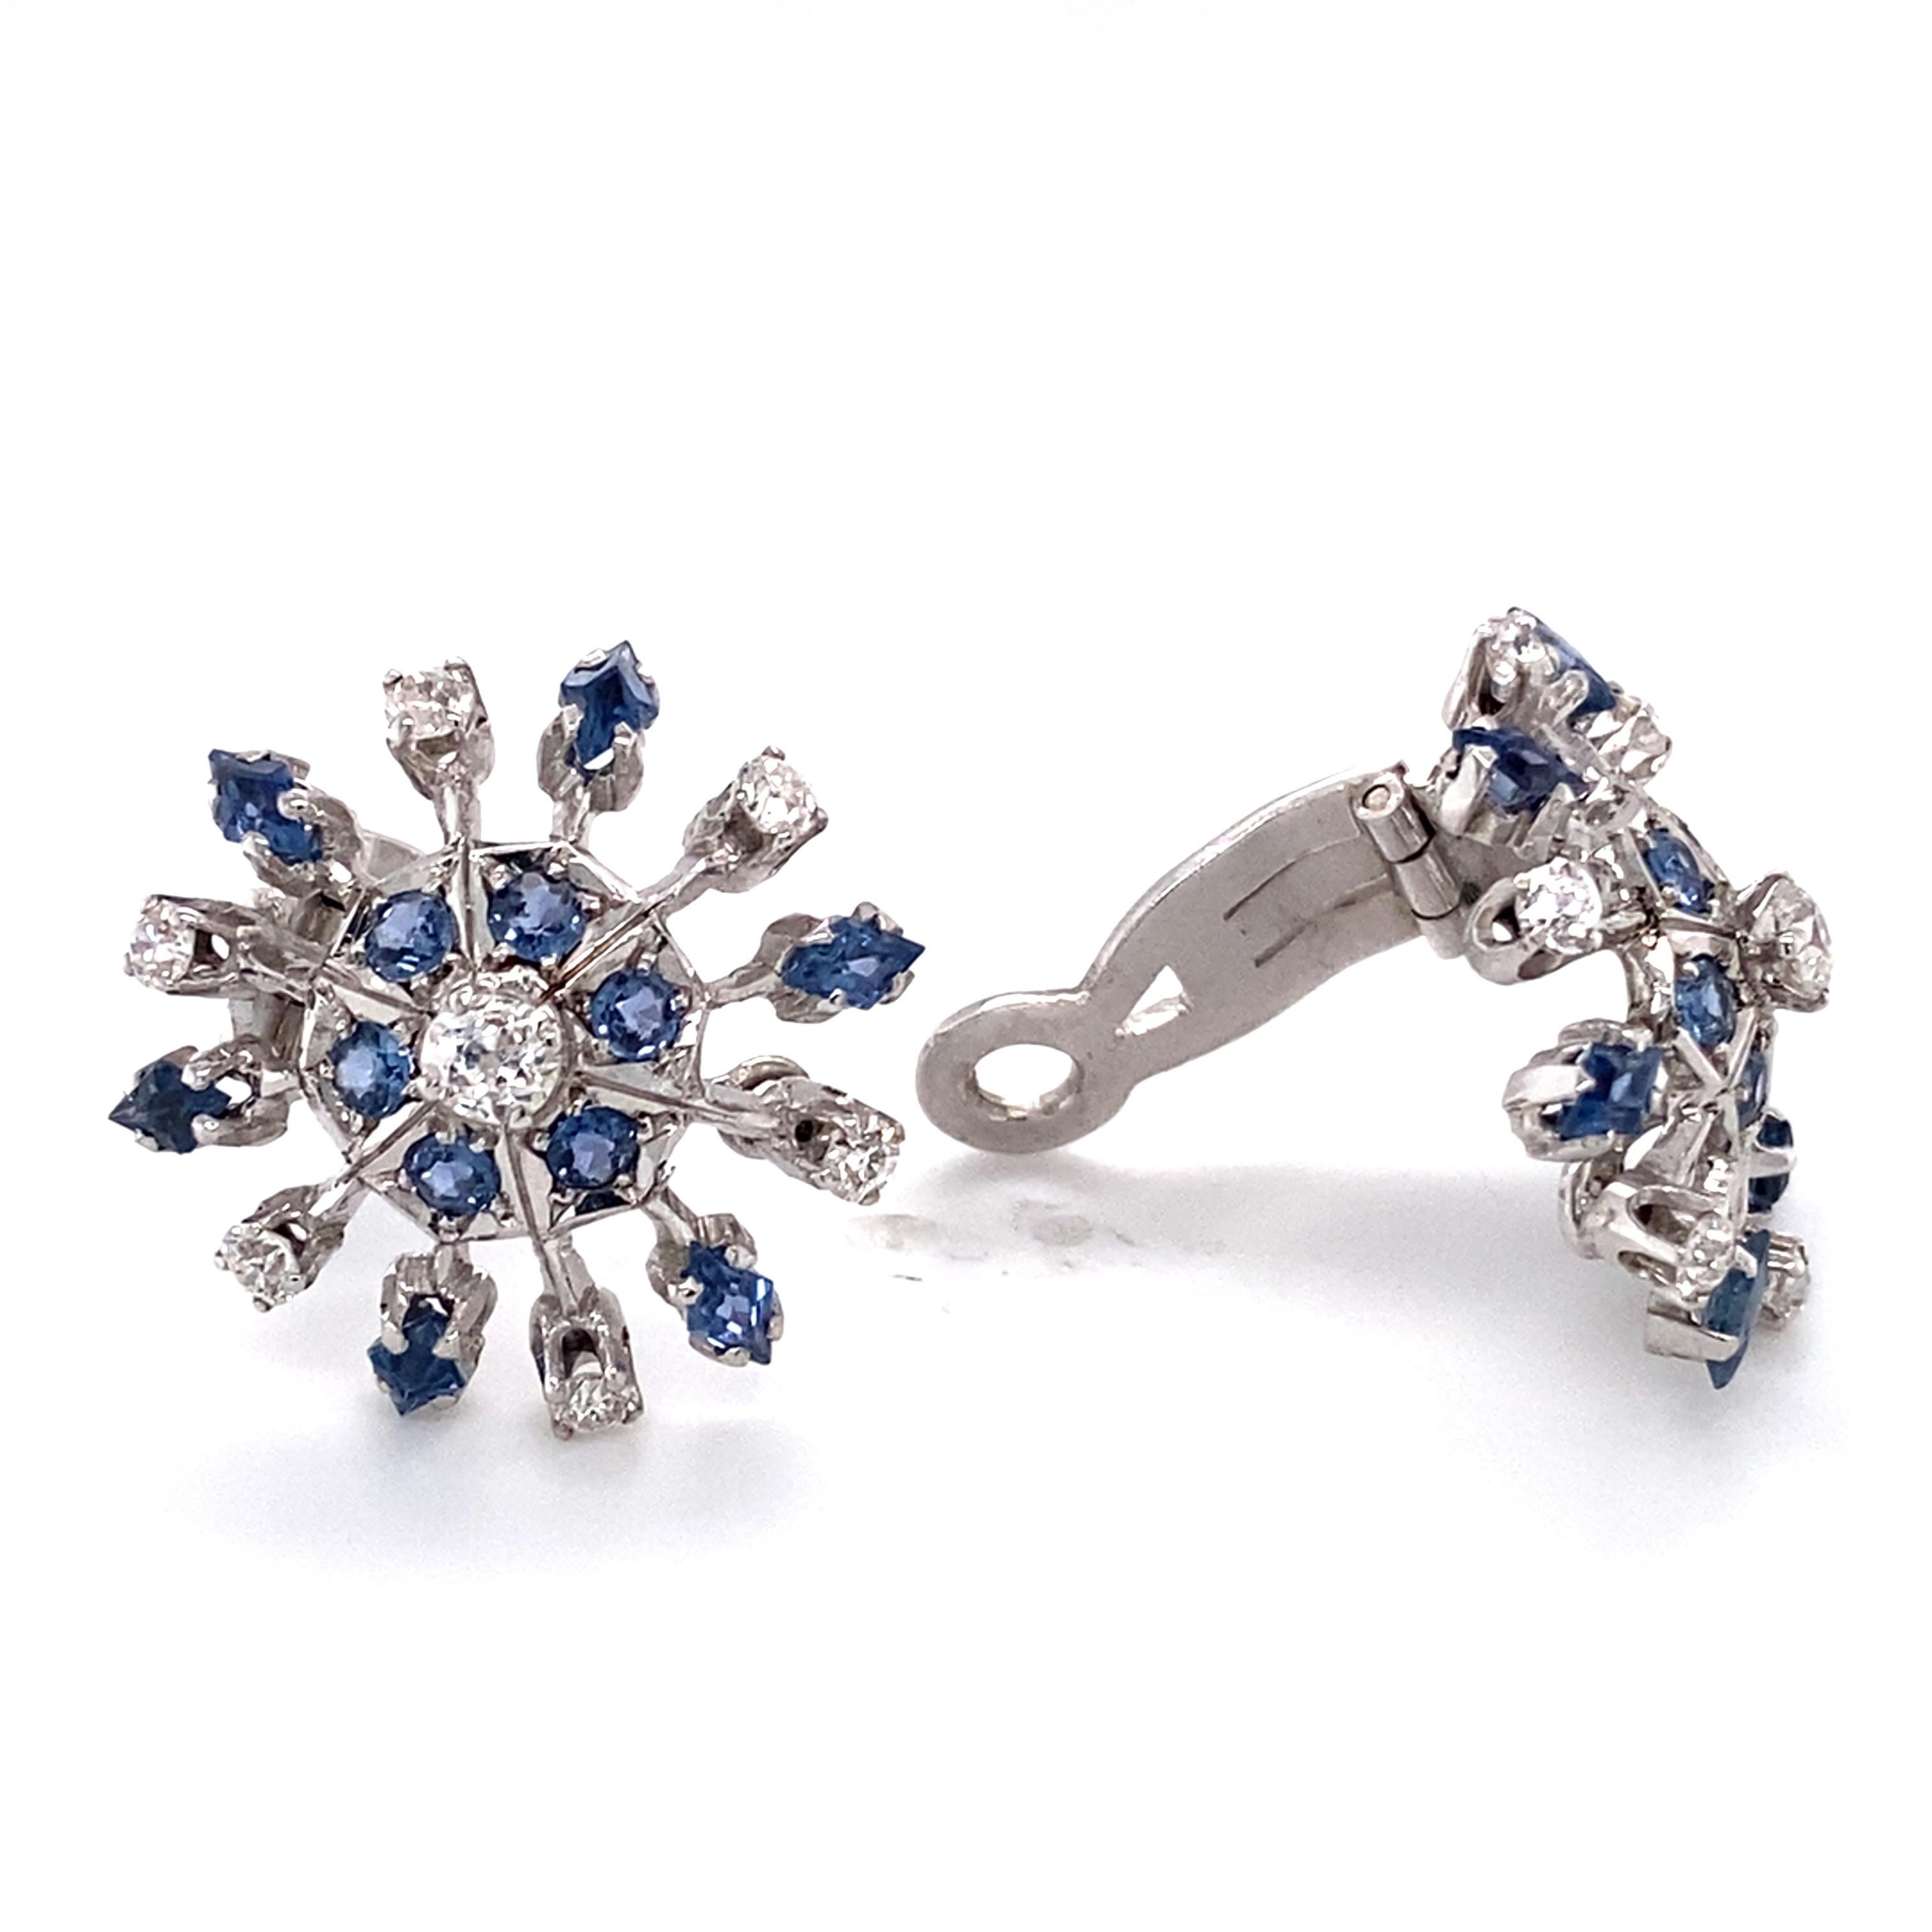 Item Details: 
Metal: 14 Karat White Gold and Platinum Mix
Weight: 12.9 grams
Measurements: 1 inch x 1 inch 

Sapphire Details:
Cut: Old Mine and Lozenge 
Carat: 0.2 carat total weight
(No treatment done to sapphires) 

Diamond Details: 
Carat: 1.80